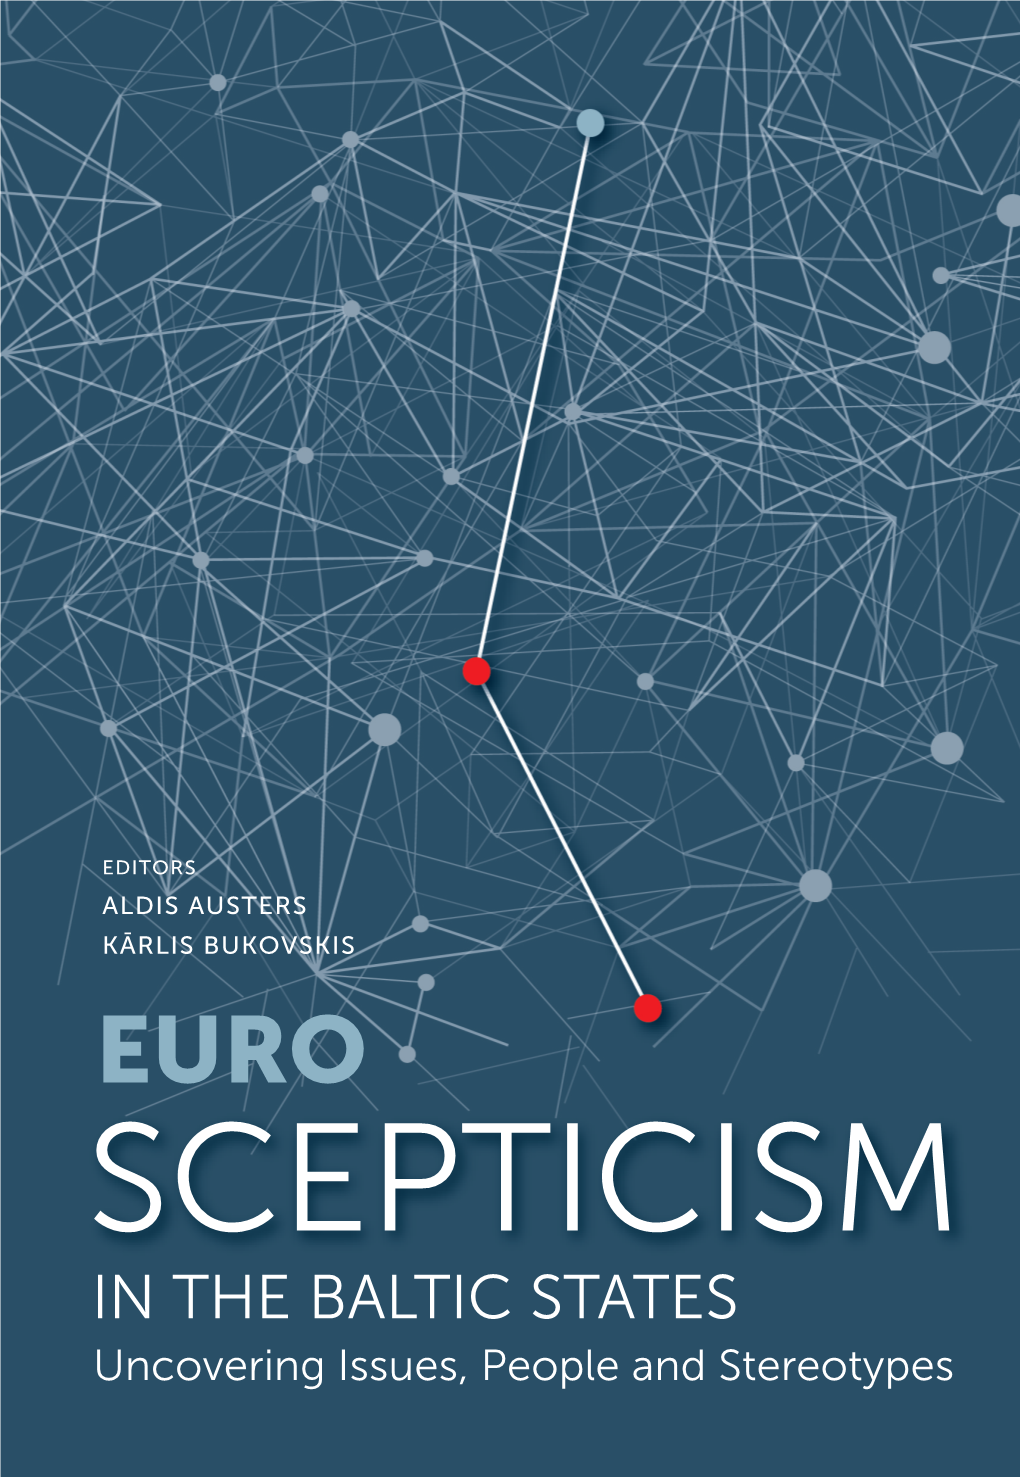 Euroscepticism in the Baltic States: Uncovering Issues, People and Stereotypes” Explores the Neglected Issue of Euroscepticism in the Baltic Societies